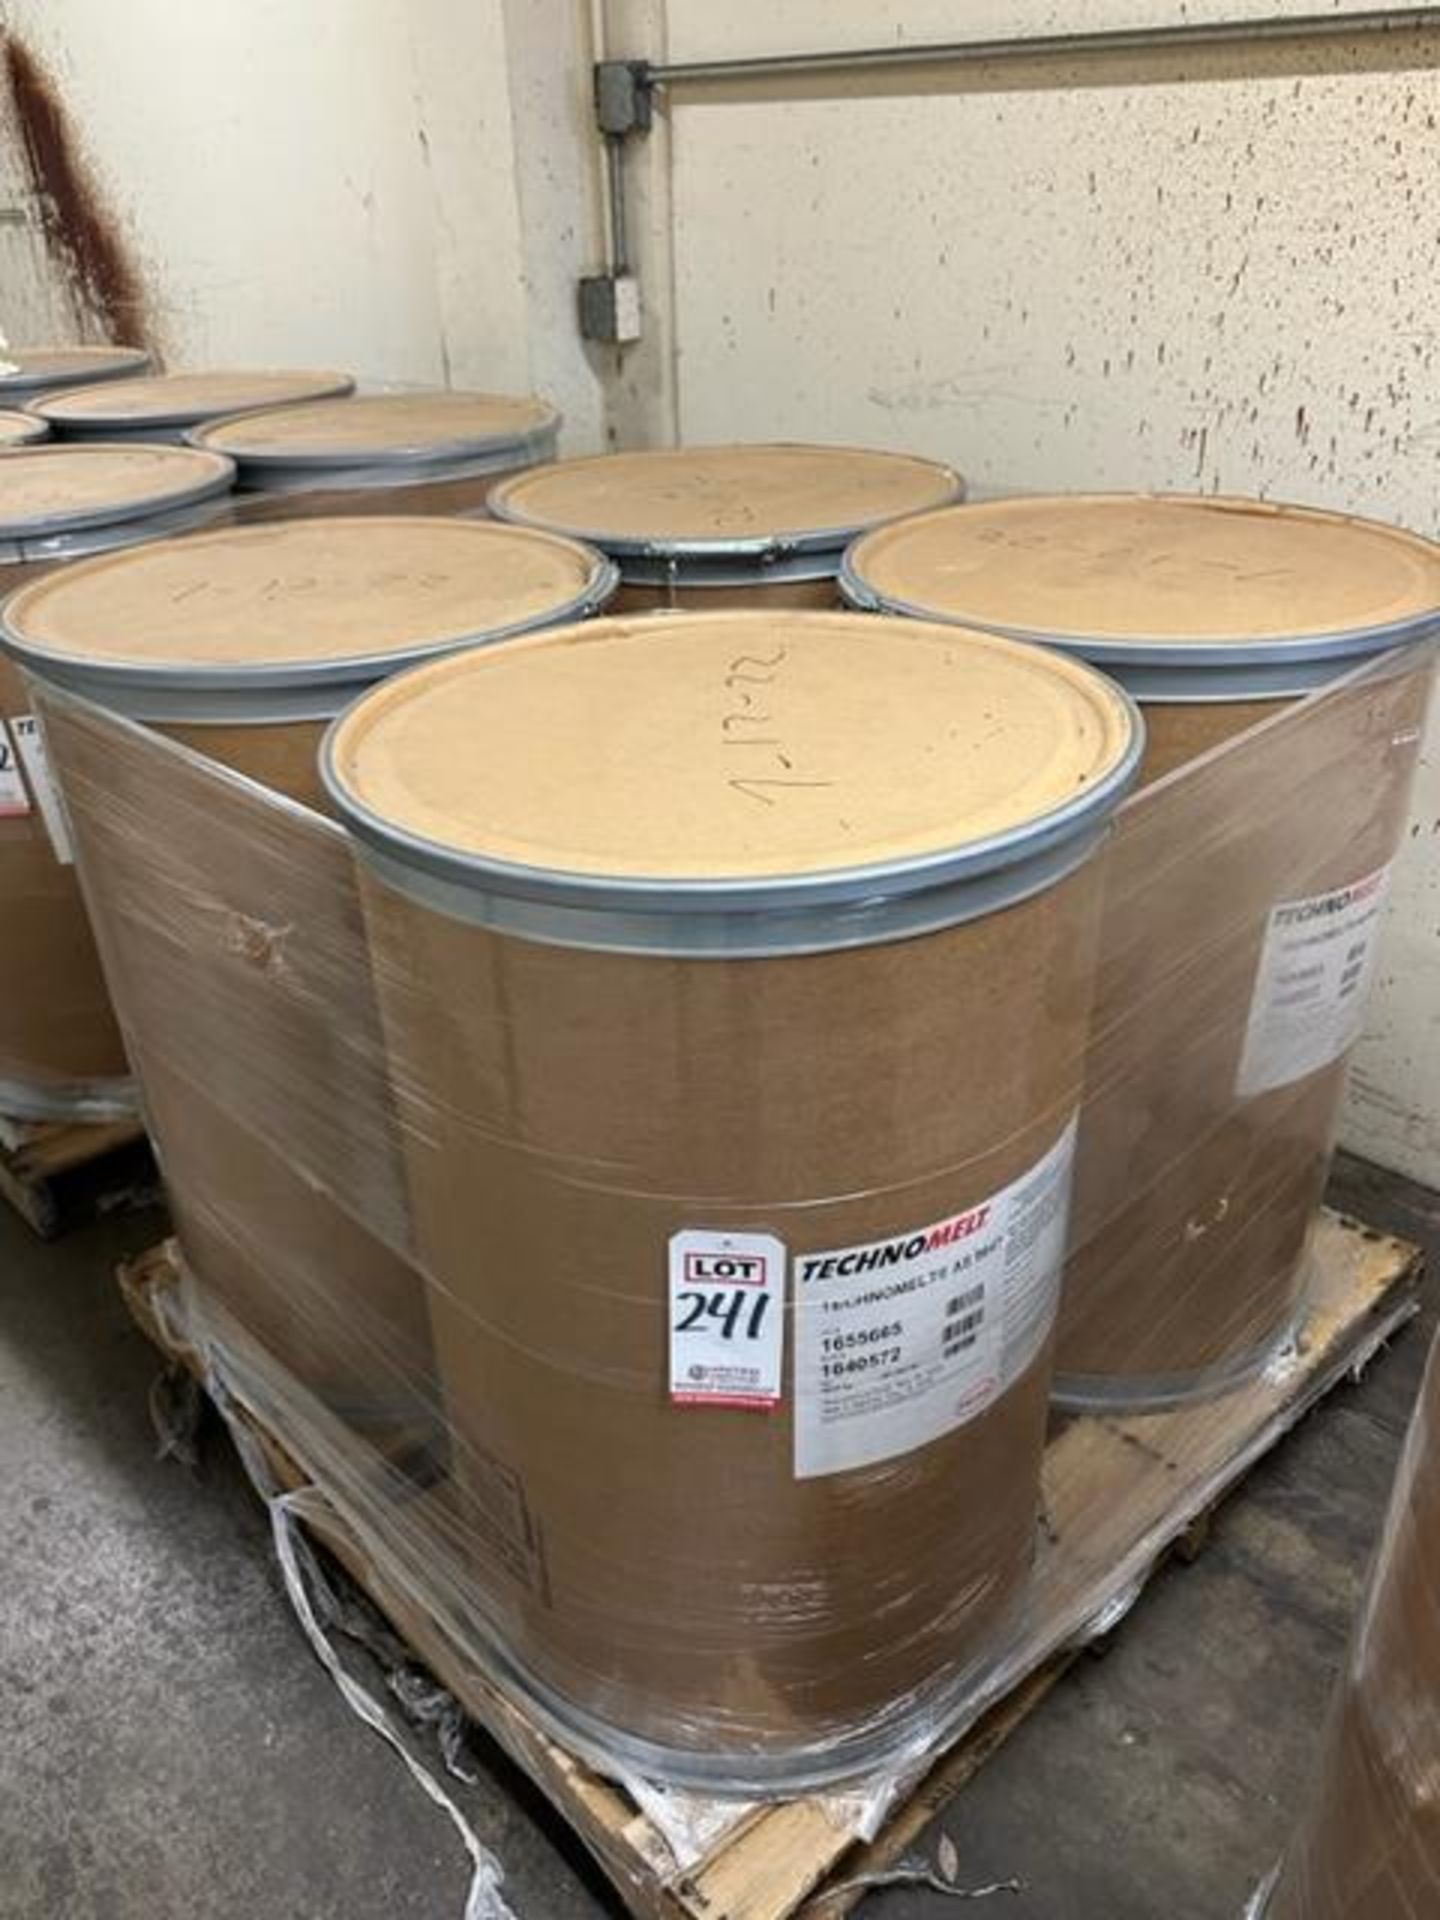 LOT - (4) 55-GALLON DRUMS OF HENKEL TECHNOMELT AS 8647, FACTORY SEALED - UNUSED ADHESIVES